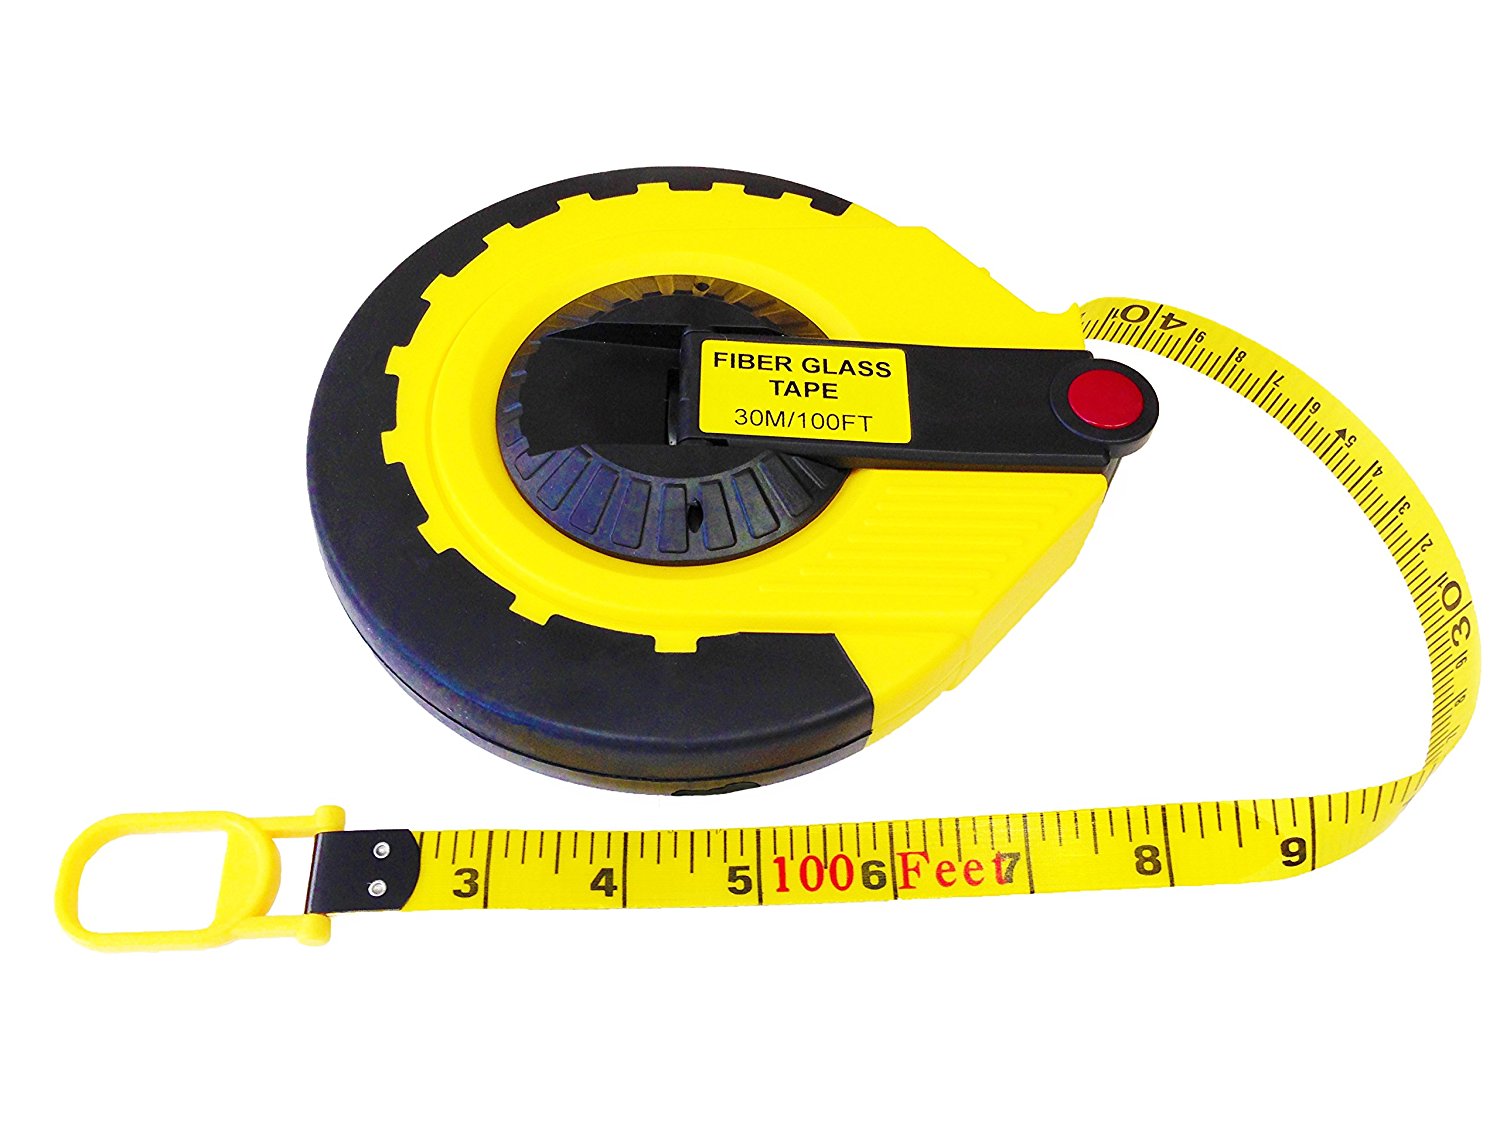 How To Read A Tape Measure Efficiently And Correctly